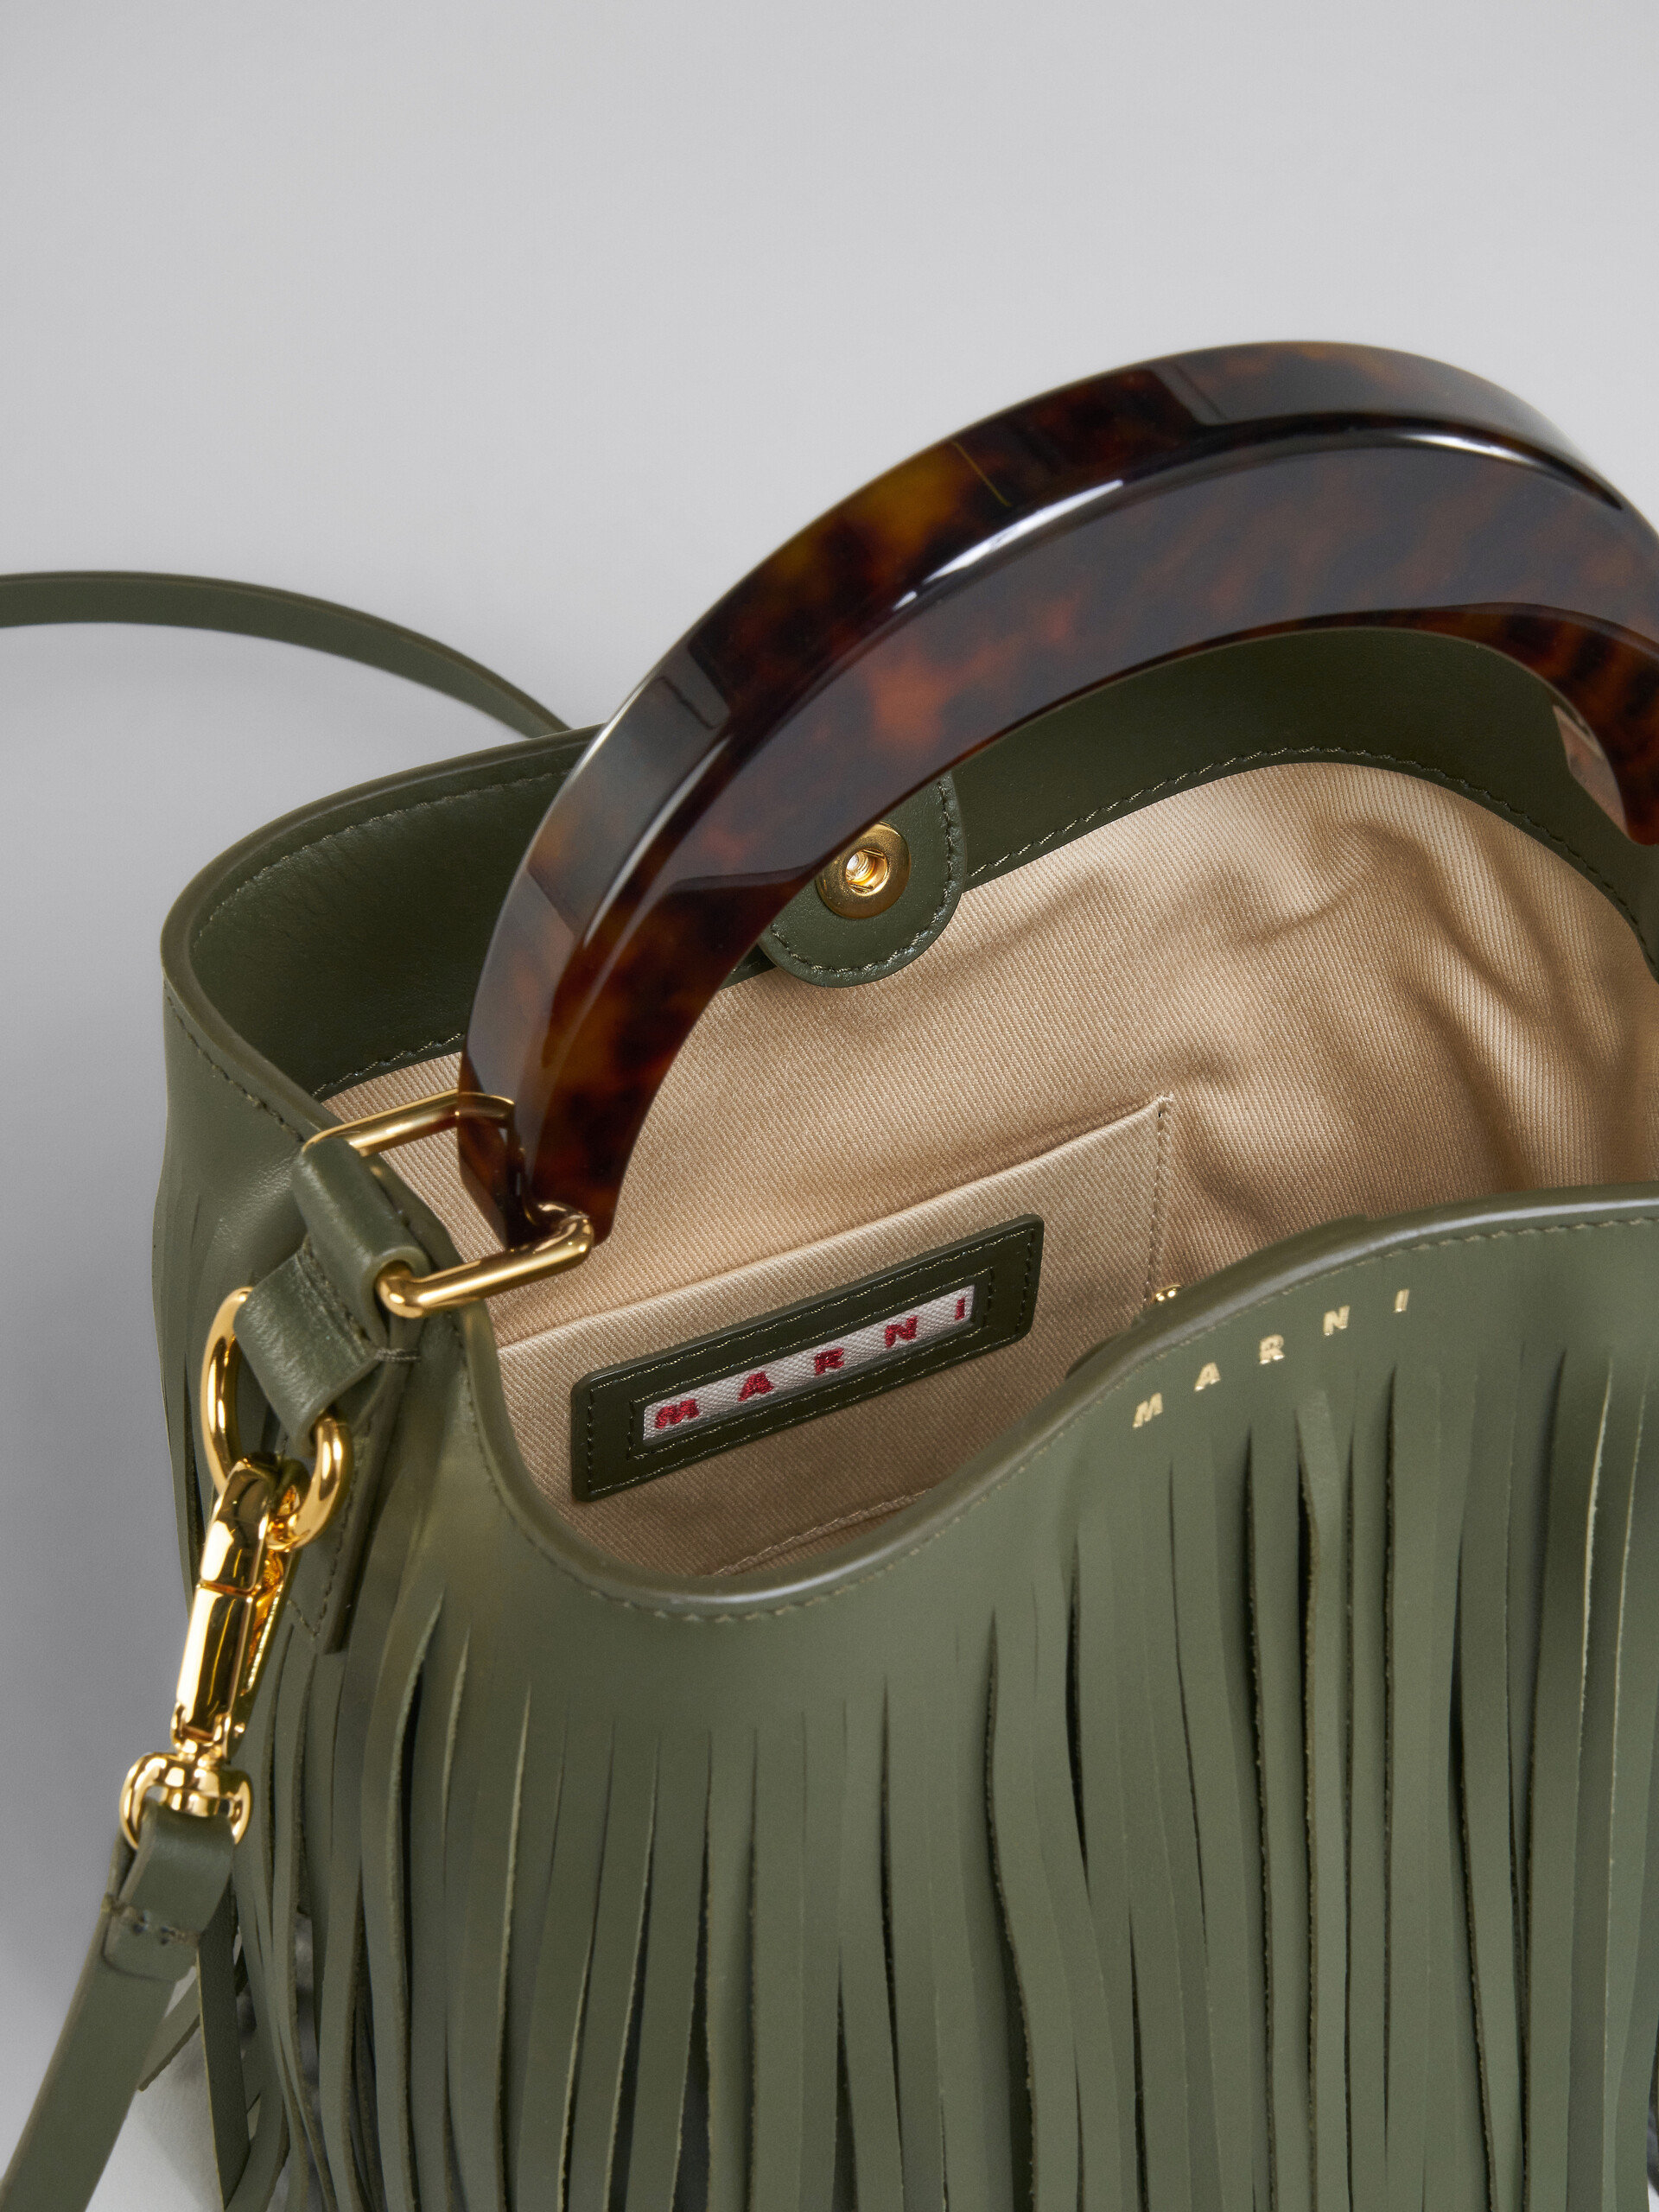 Venice Small Bucket in green leather with fringes - Shoulder Bag - Image 4